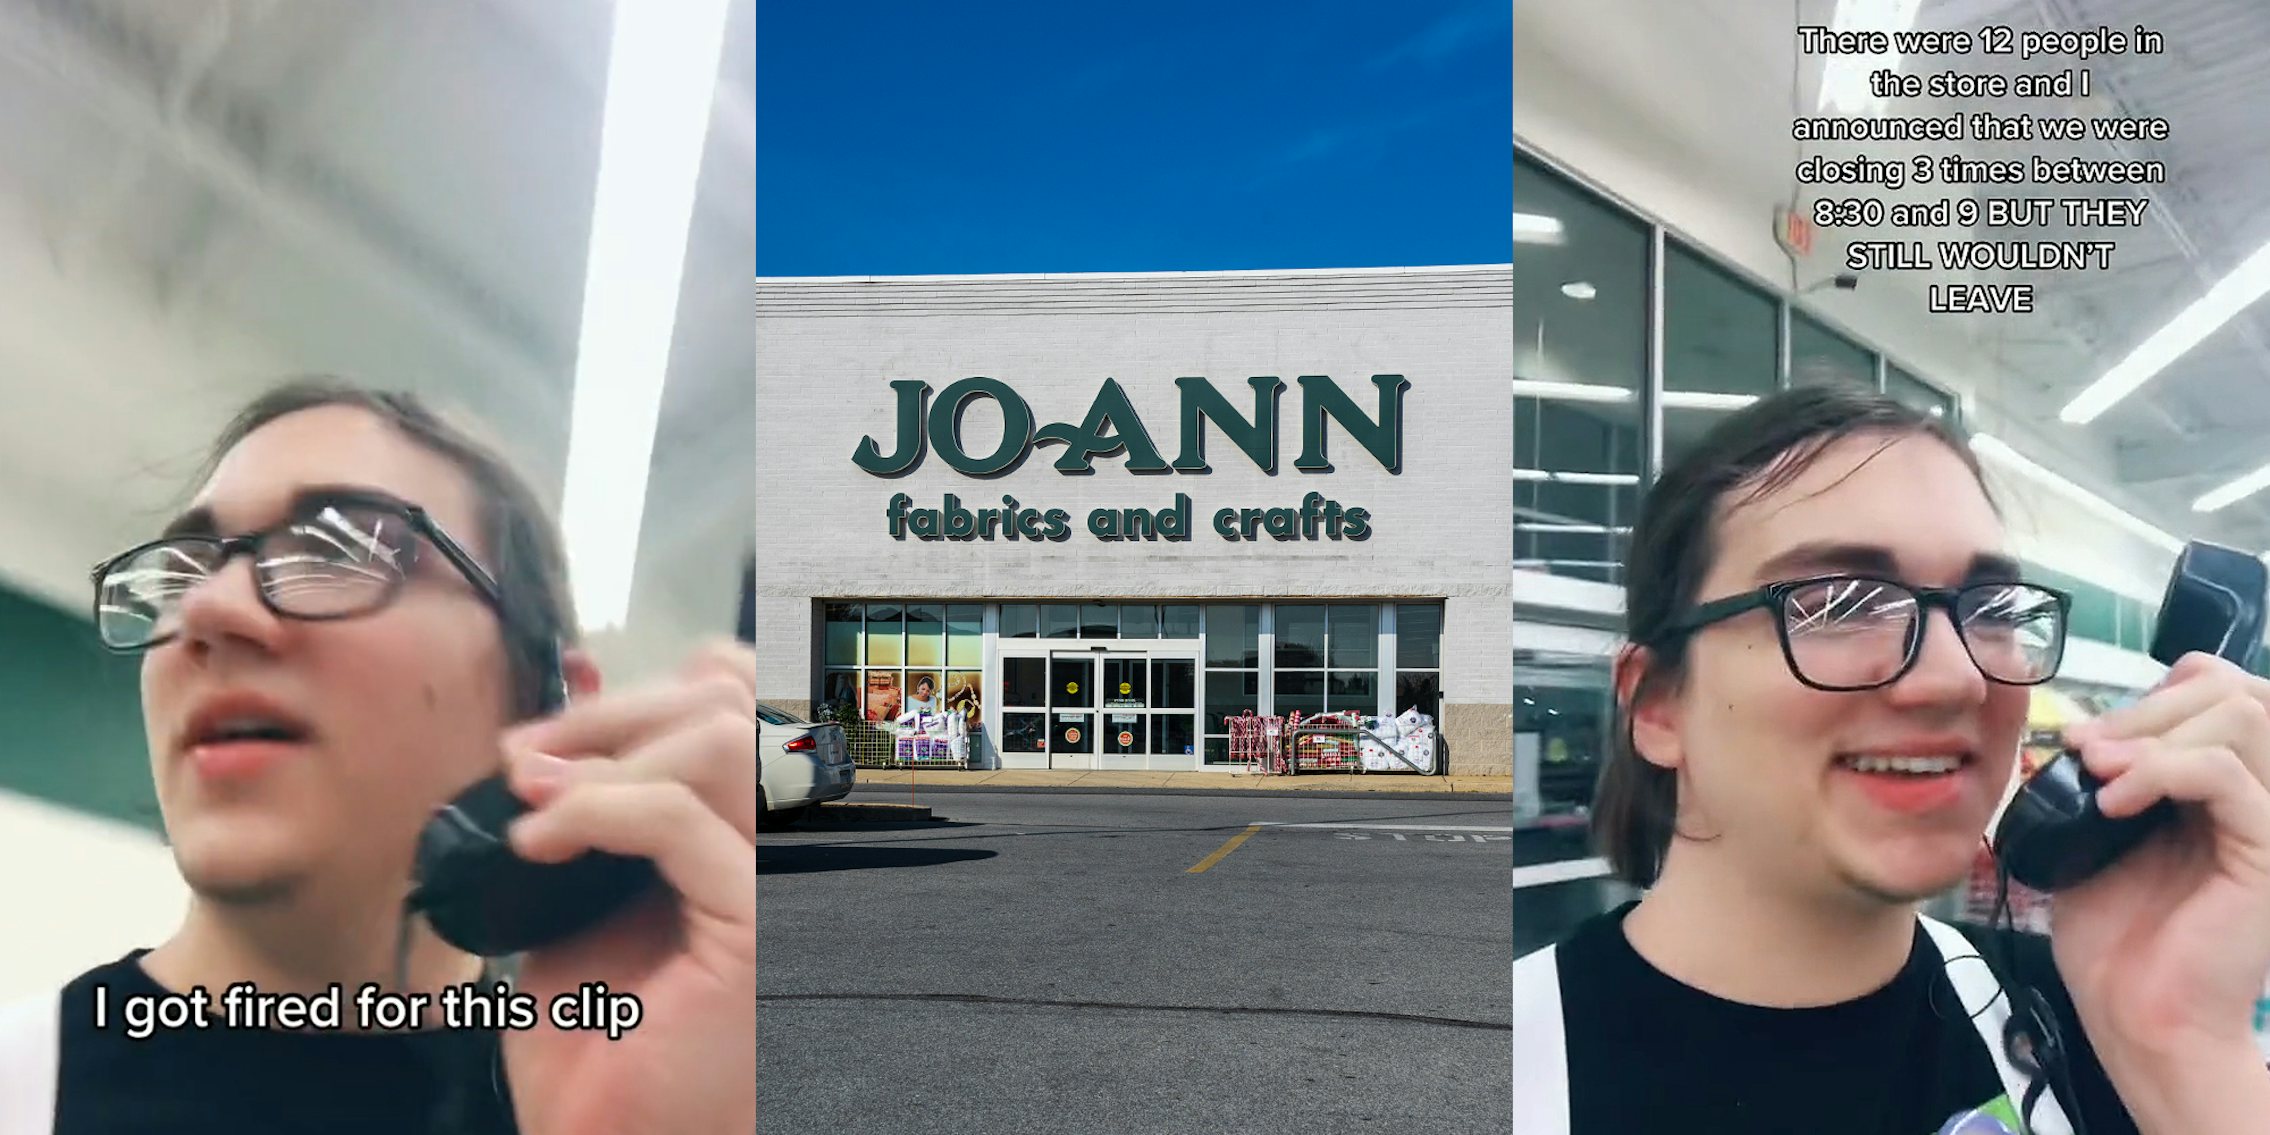 Joann Fabric's employee speaking on store intercom caption 'I got fired for this clip' (l) Joann Fabric's building with sign and parking lot (c) Joann Fabric's employee speaking on store intercom caption 'There were 12 people in the store and I announced that we were closing 3 times between 8:30 and 9 BUT THEY STILL WOULDN'T LEAVE' (r)